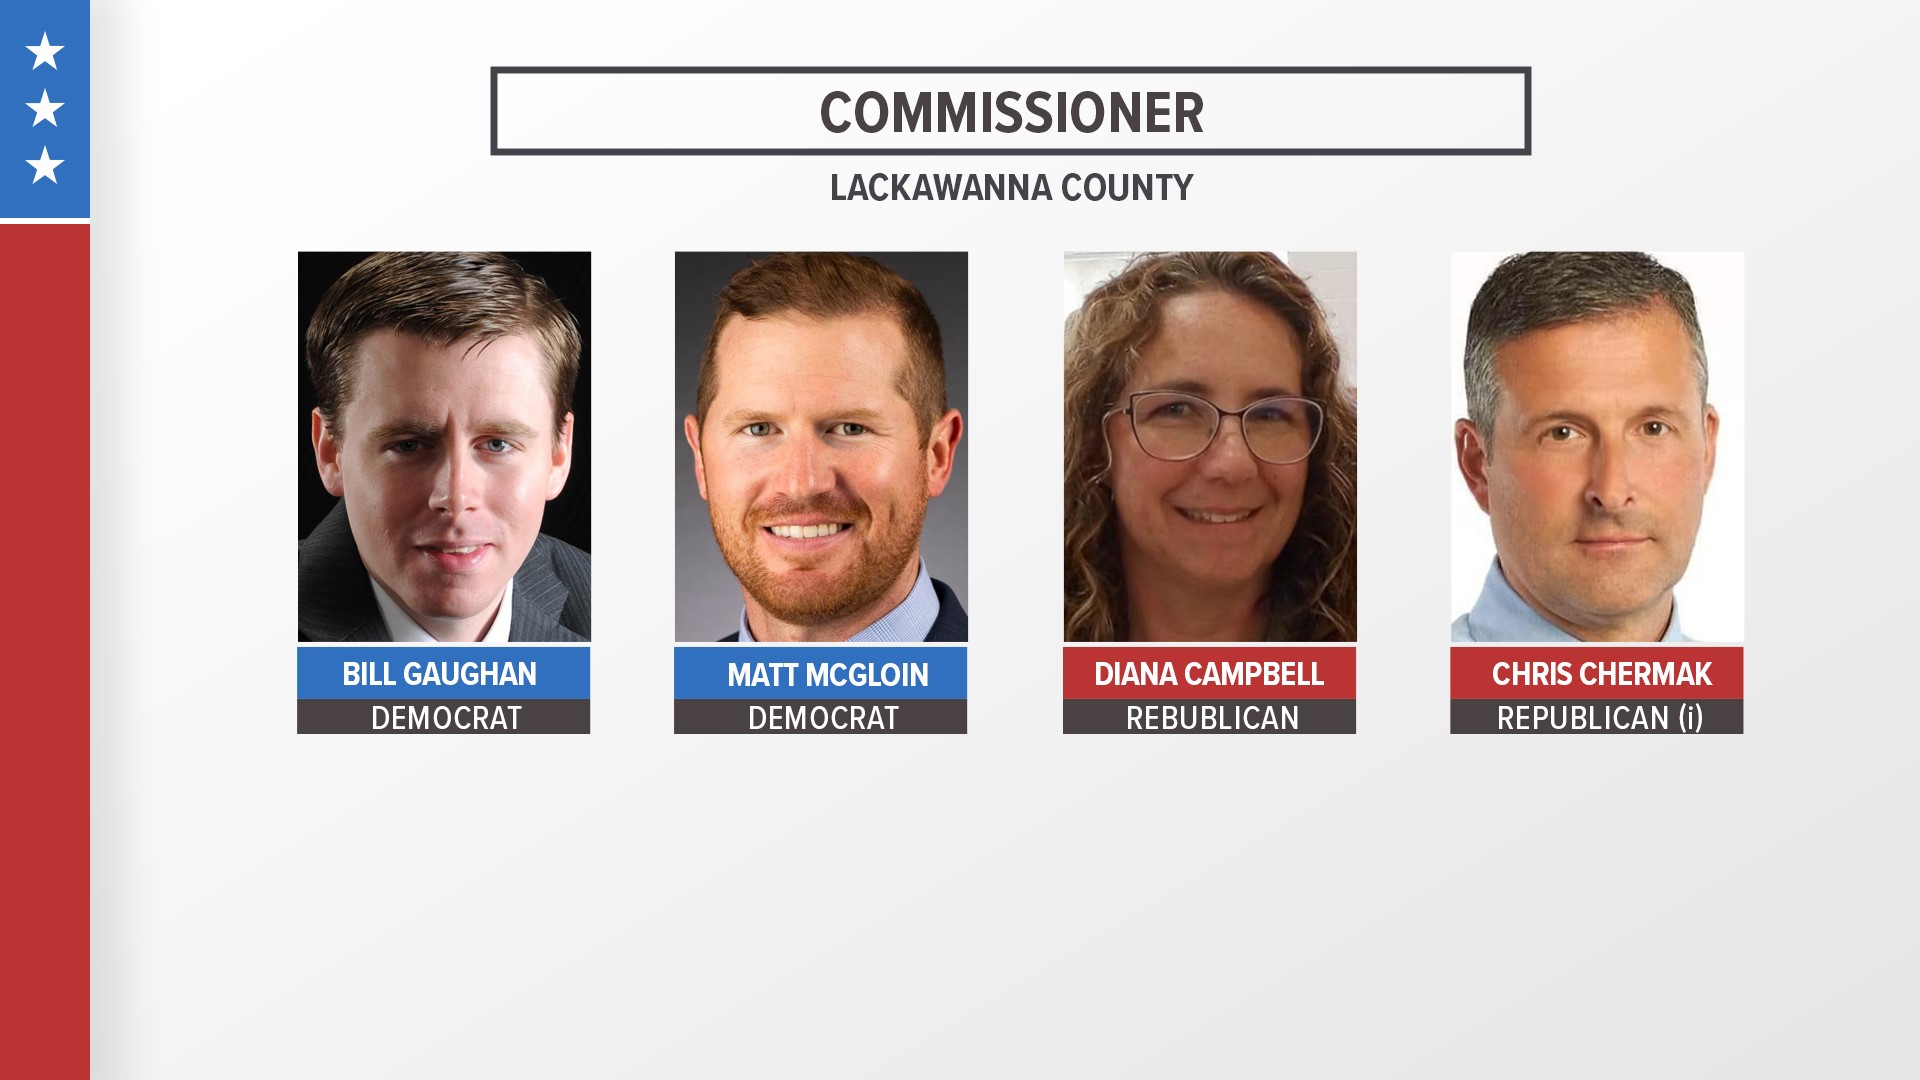 Four candidates are vying for the three open seats for Lackawanna County Commissioner. We hear from the candidates about their plans if elected and big issues.